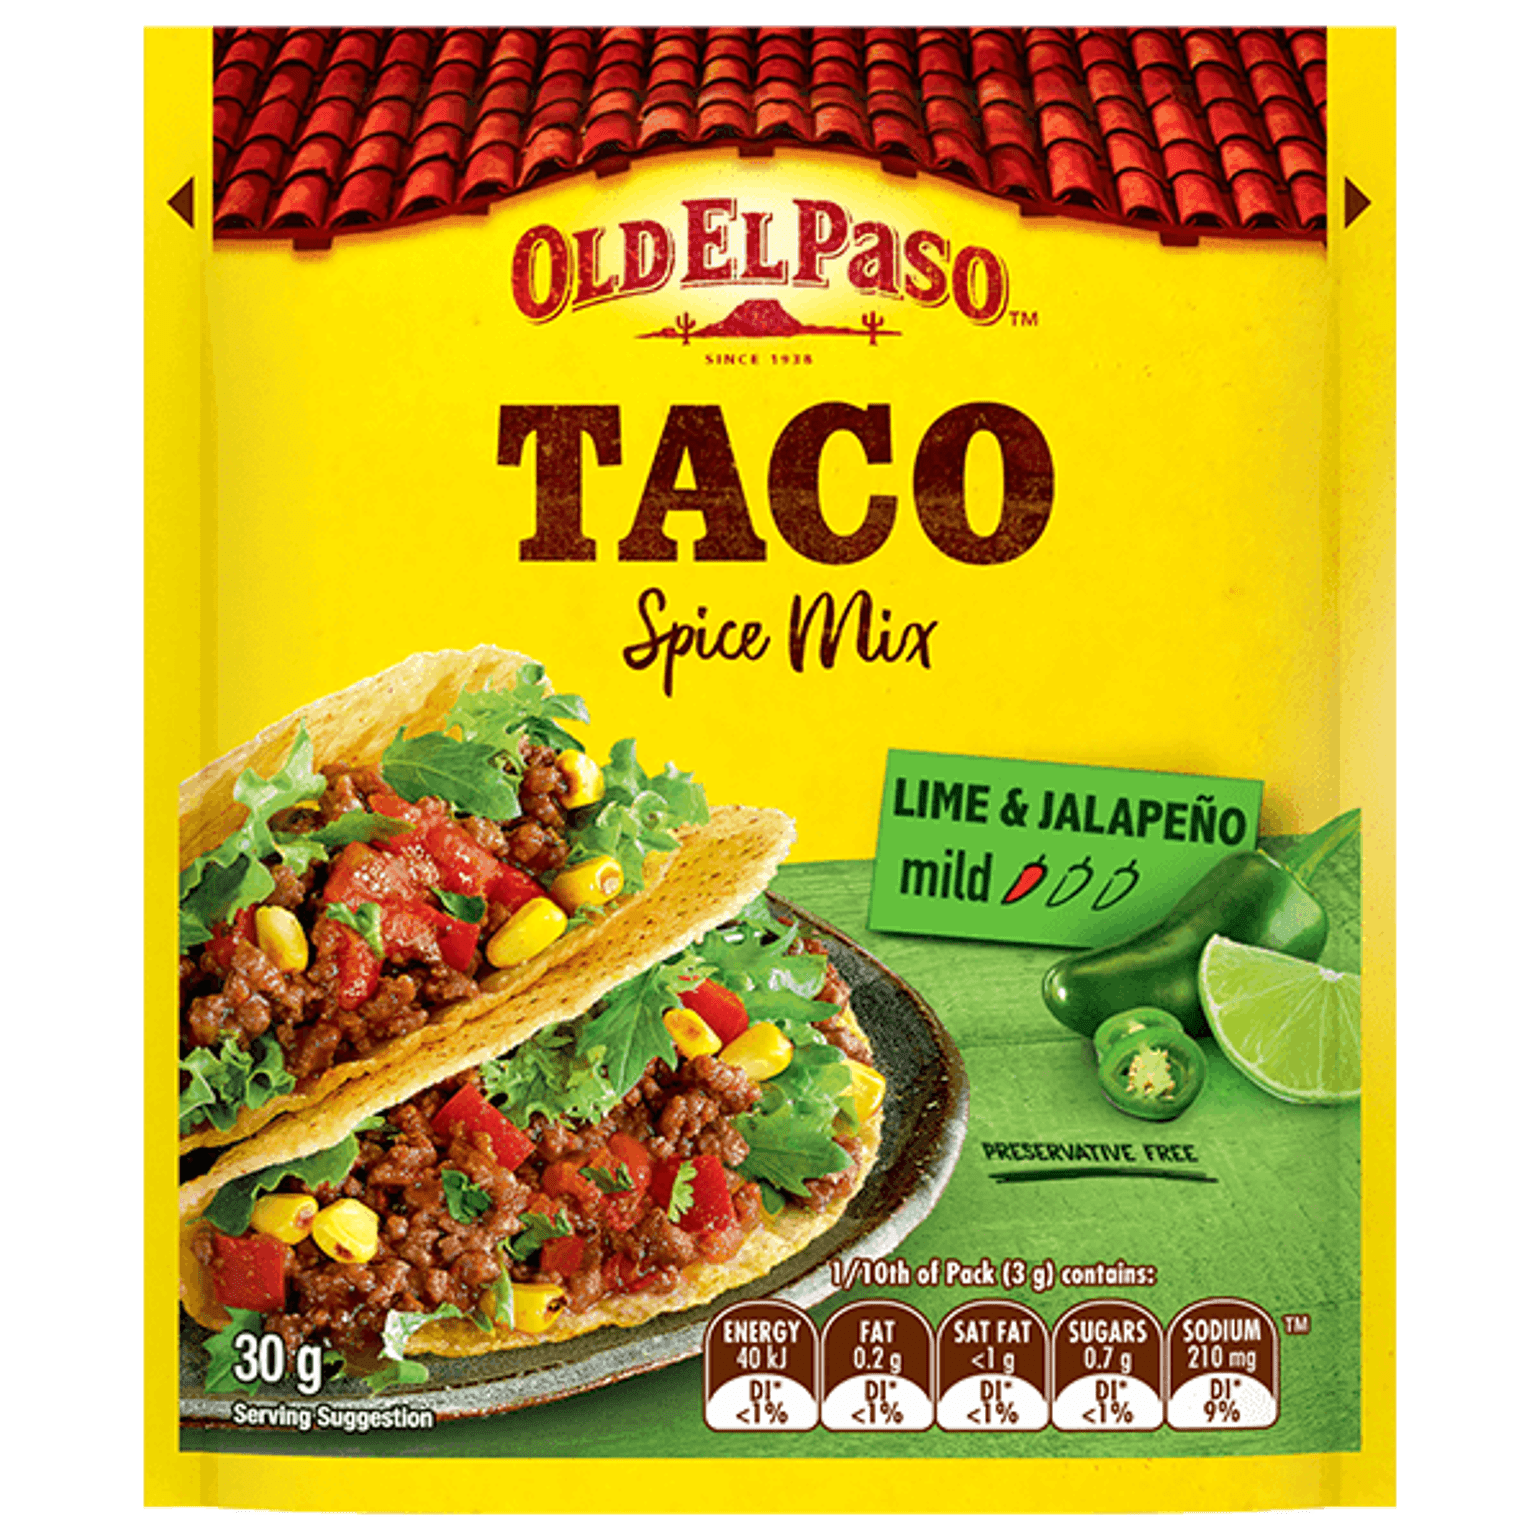 a pack of Old El Paso's lime jalapenos taco spice mix mild (30g)